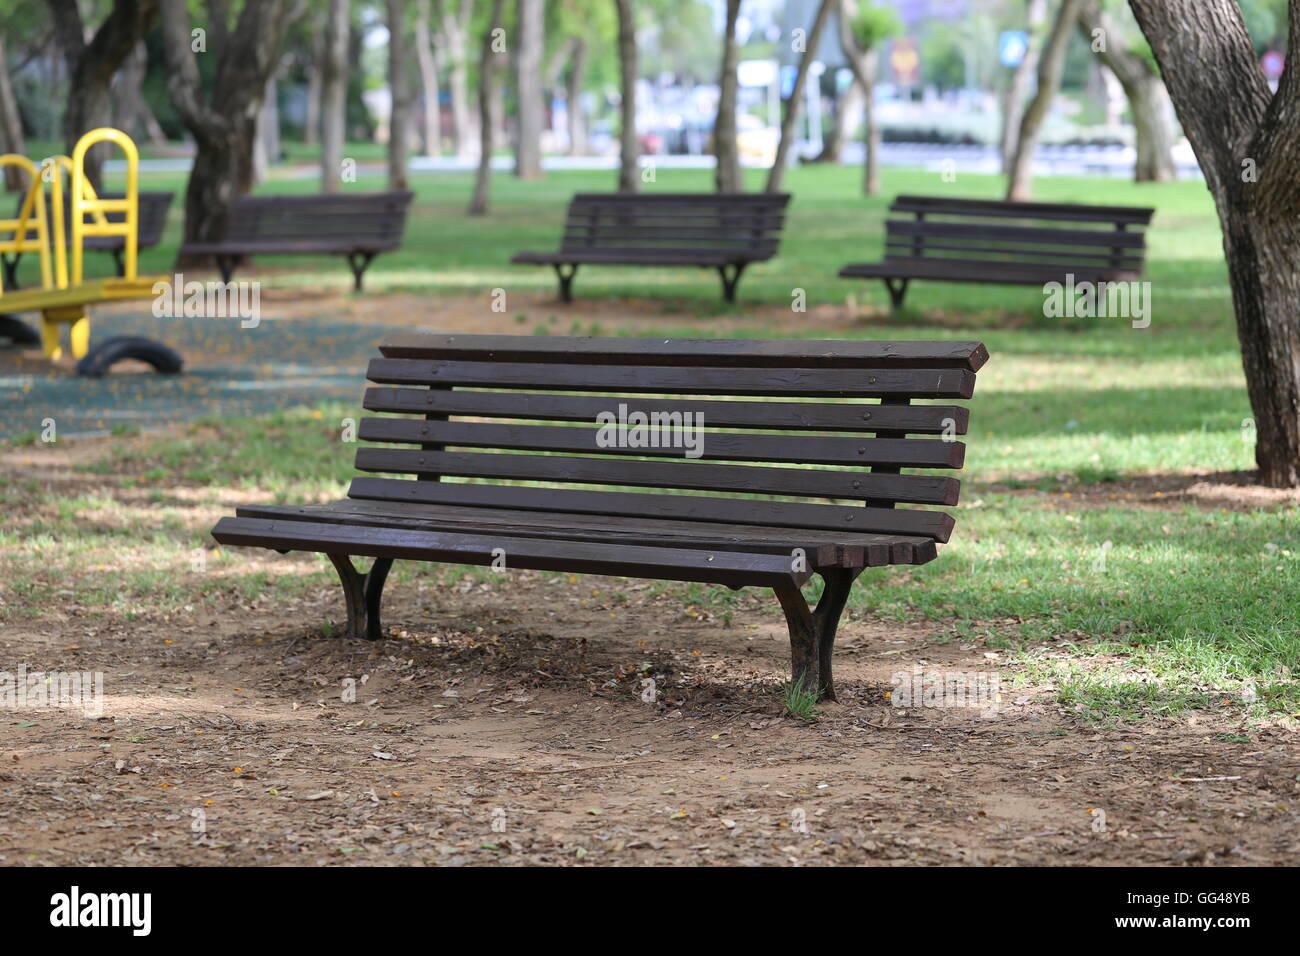 Park Benches. Public park benches in the shady grove. Wooden benches in the park near playground toys. Stock Photo